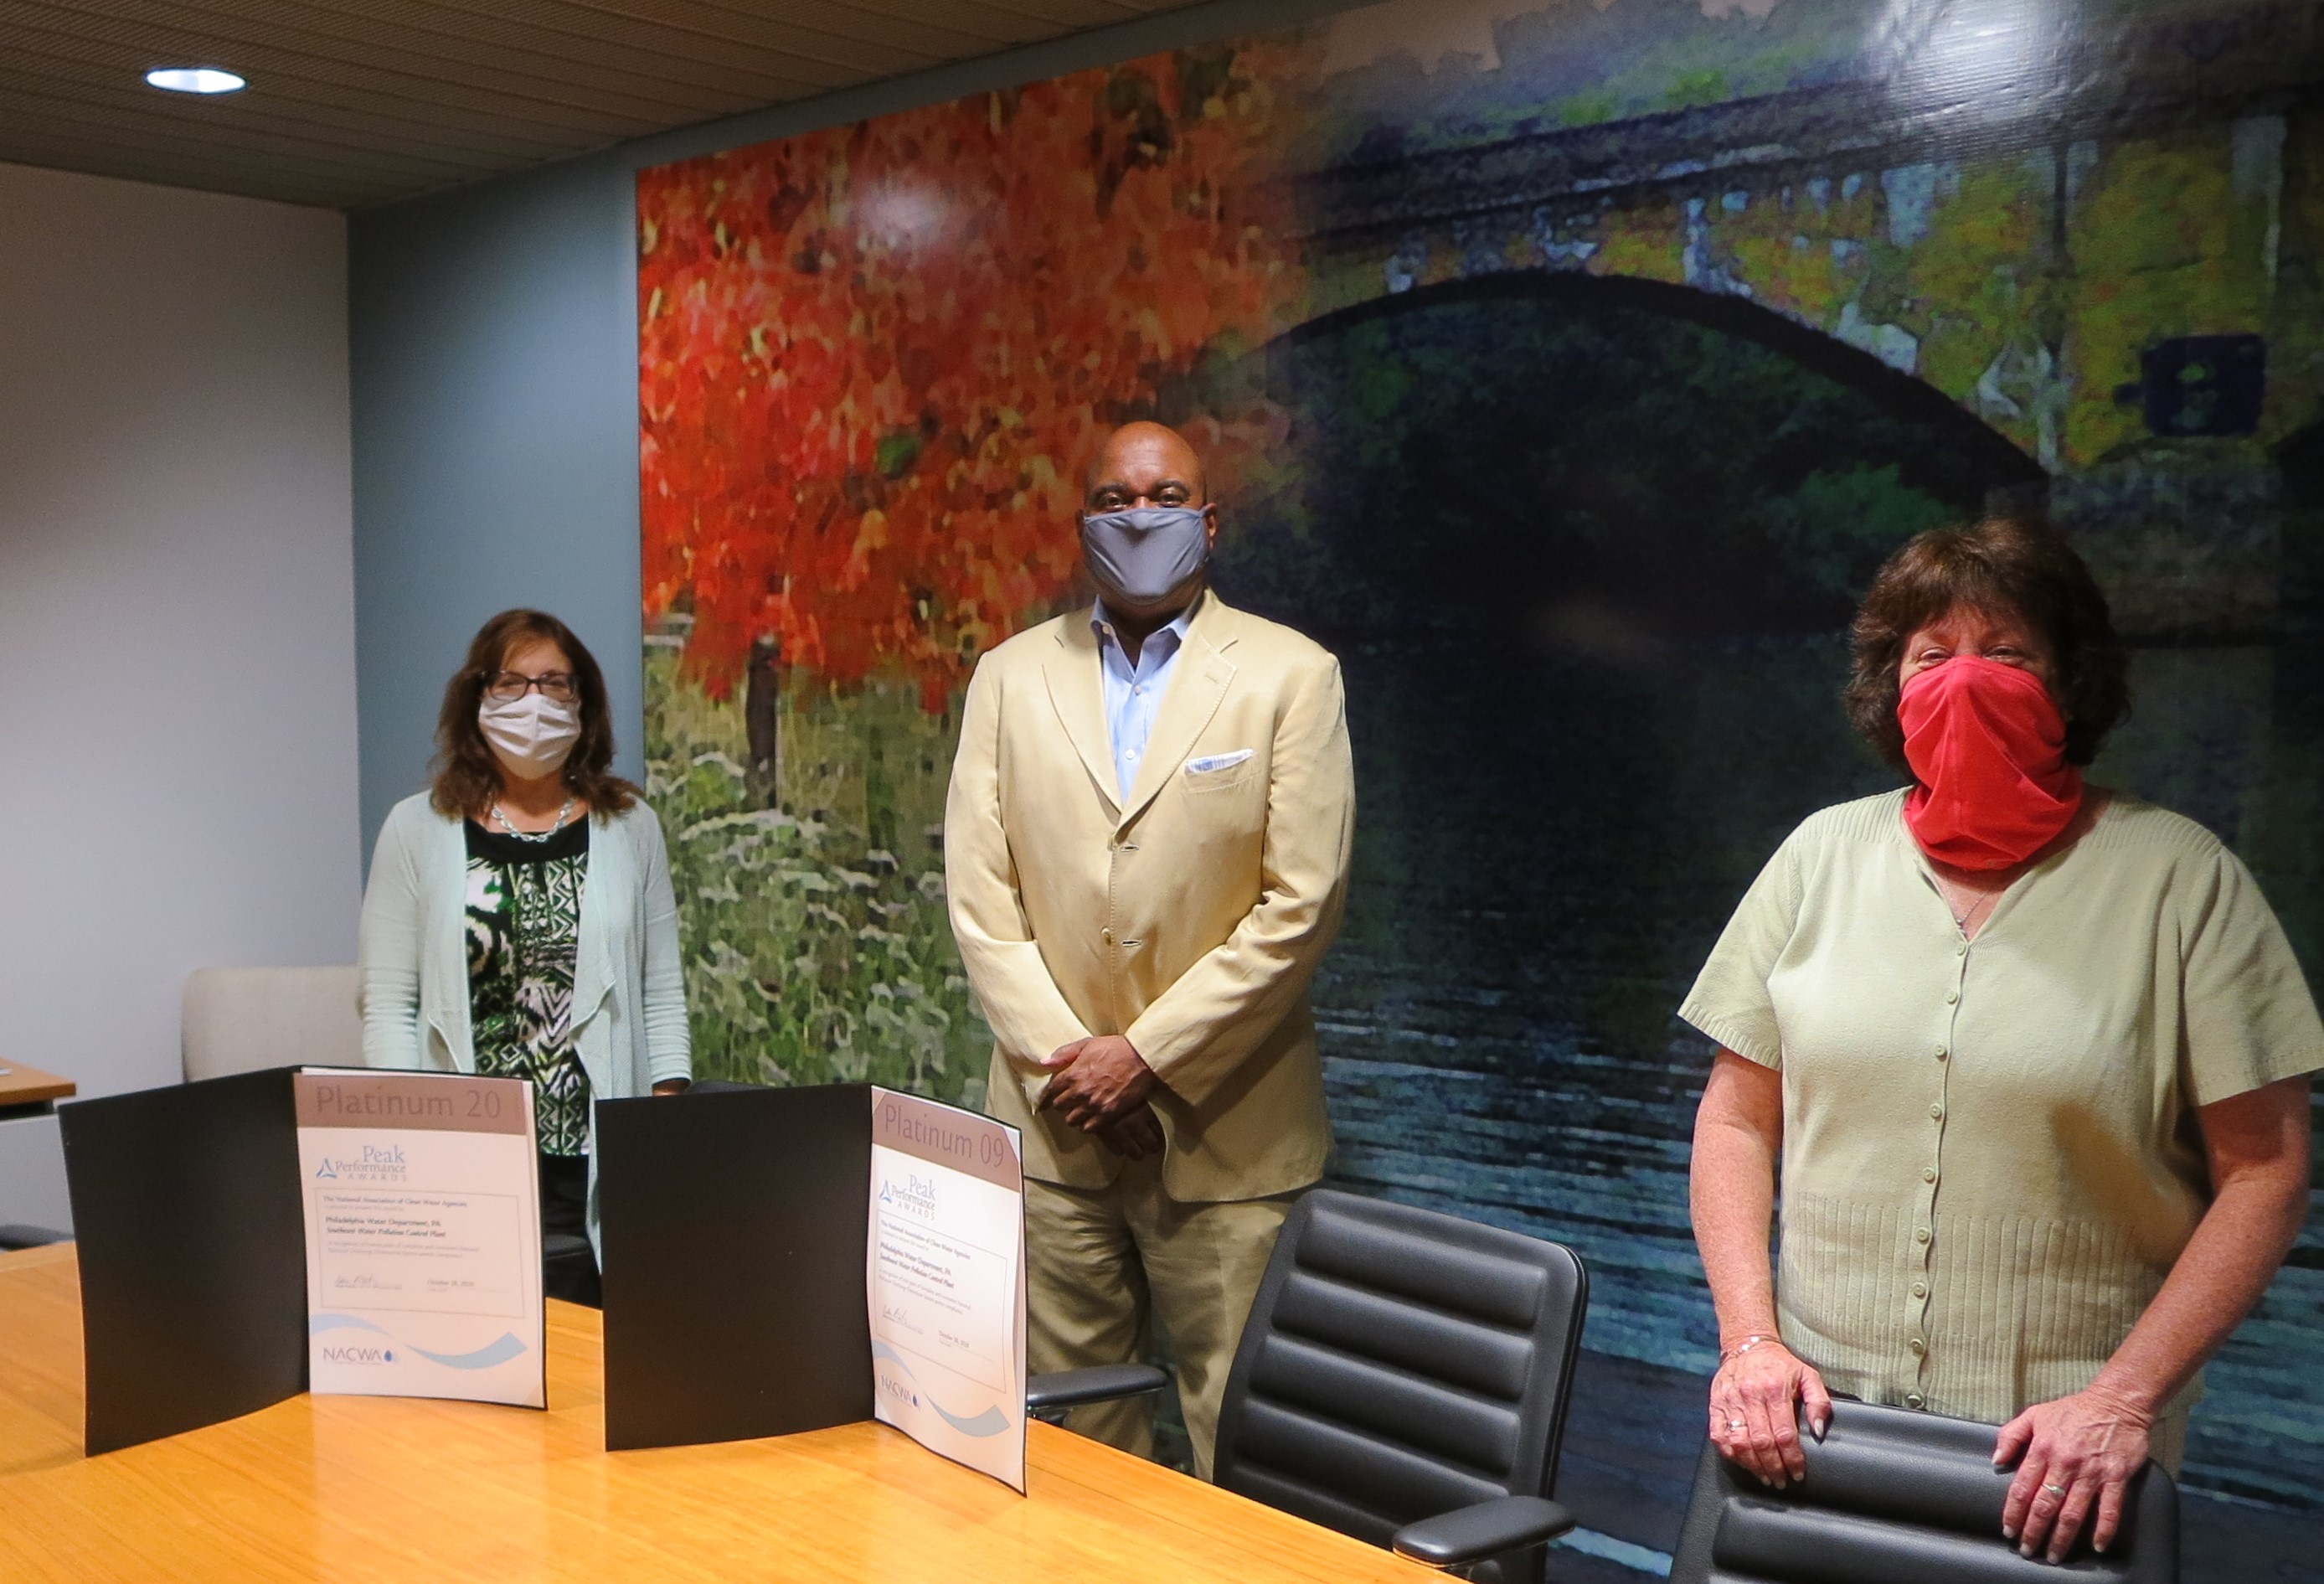 Mary Ellen Senss, Commissioner Hayman, and Donna Schwartz stand spaced out behind a conference table, wearing masks. The award certificates are propped up on the table in front of them.